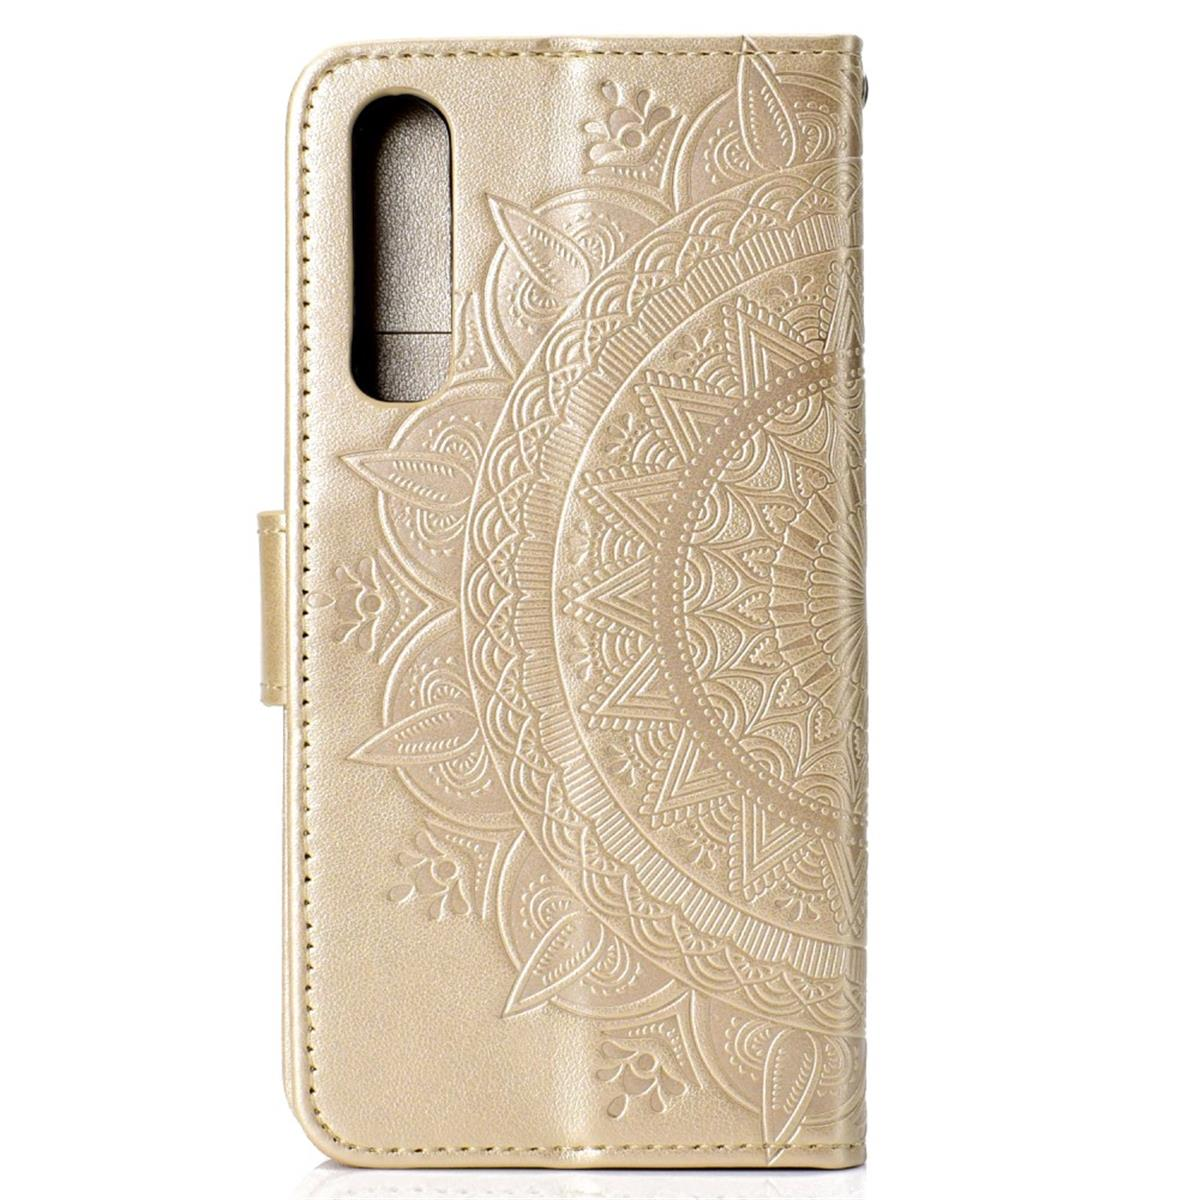 COVERKINGZ Klapphülle mit Huawei, P30, Gold Bookcover, Mandala Muster